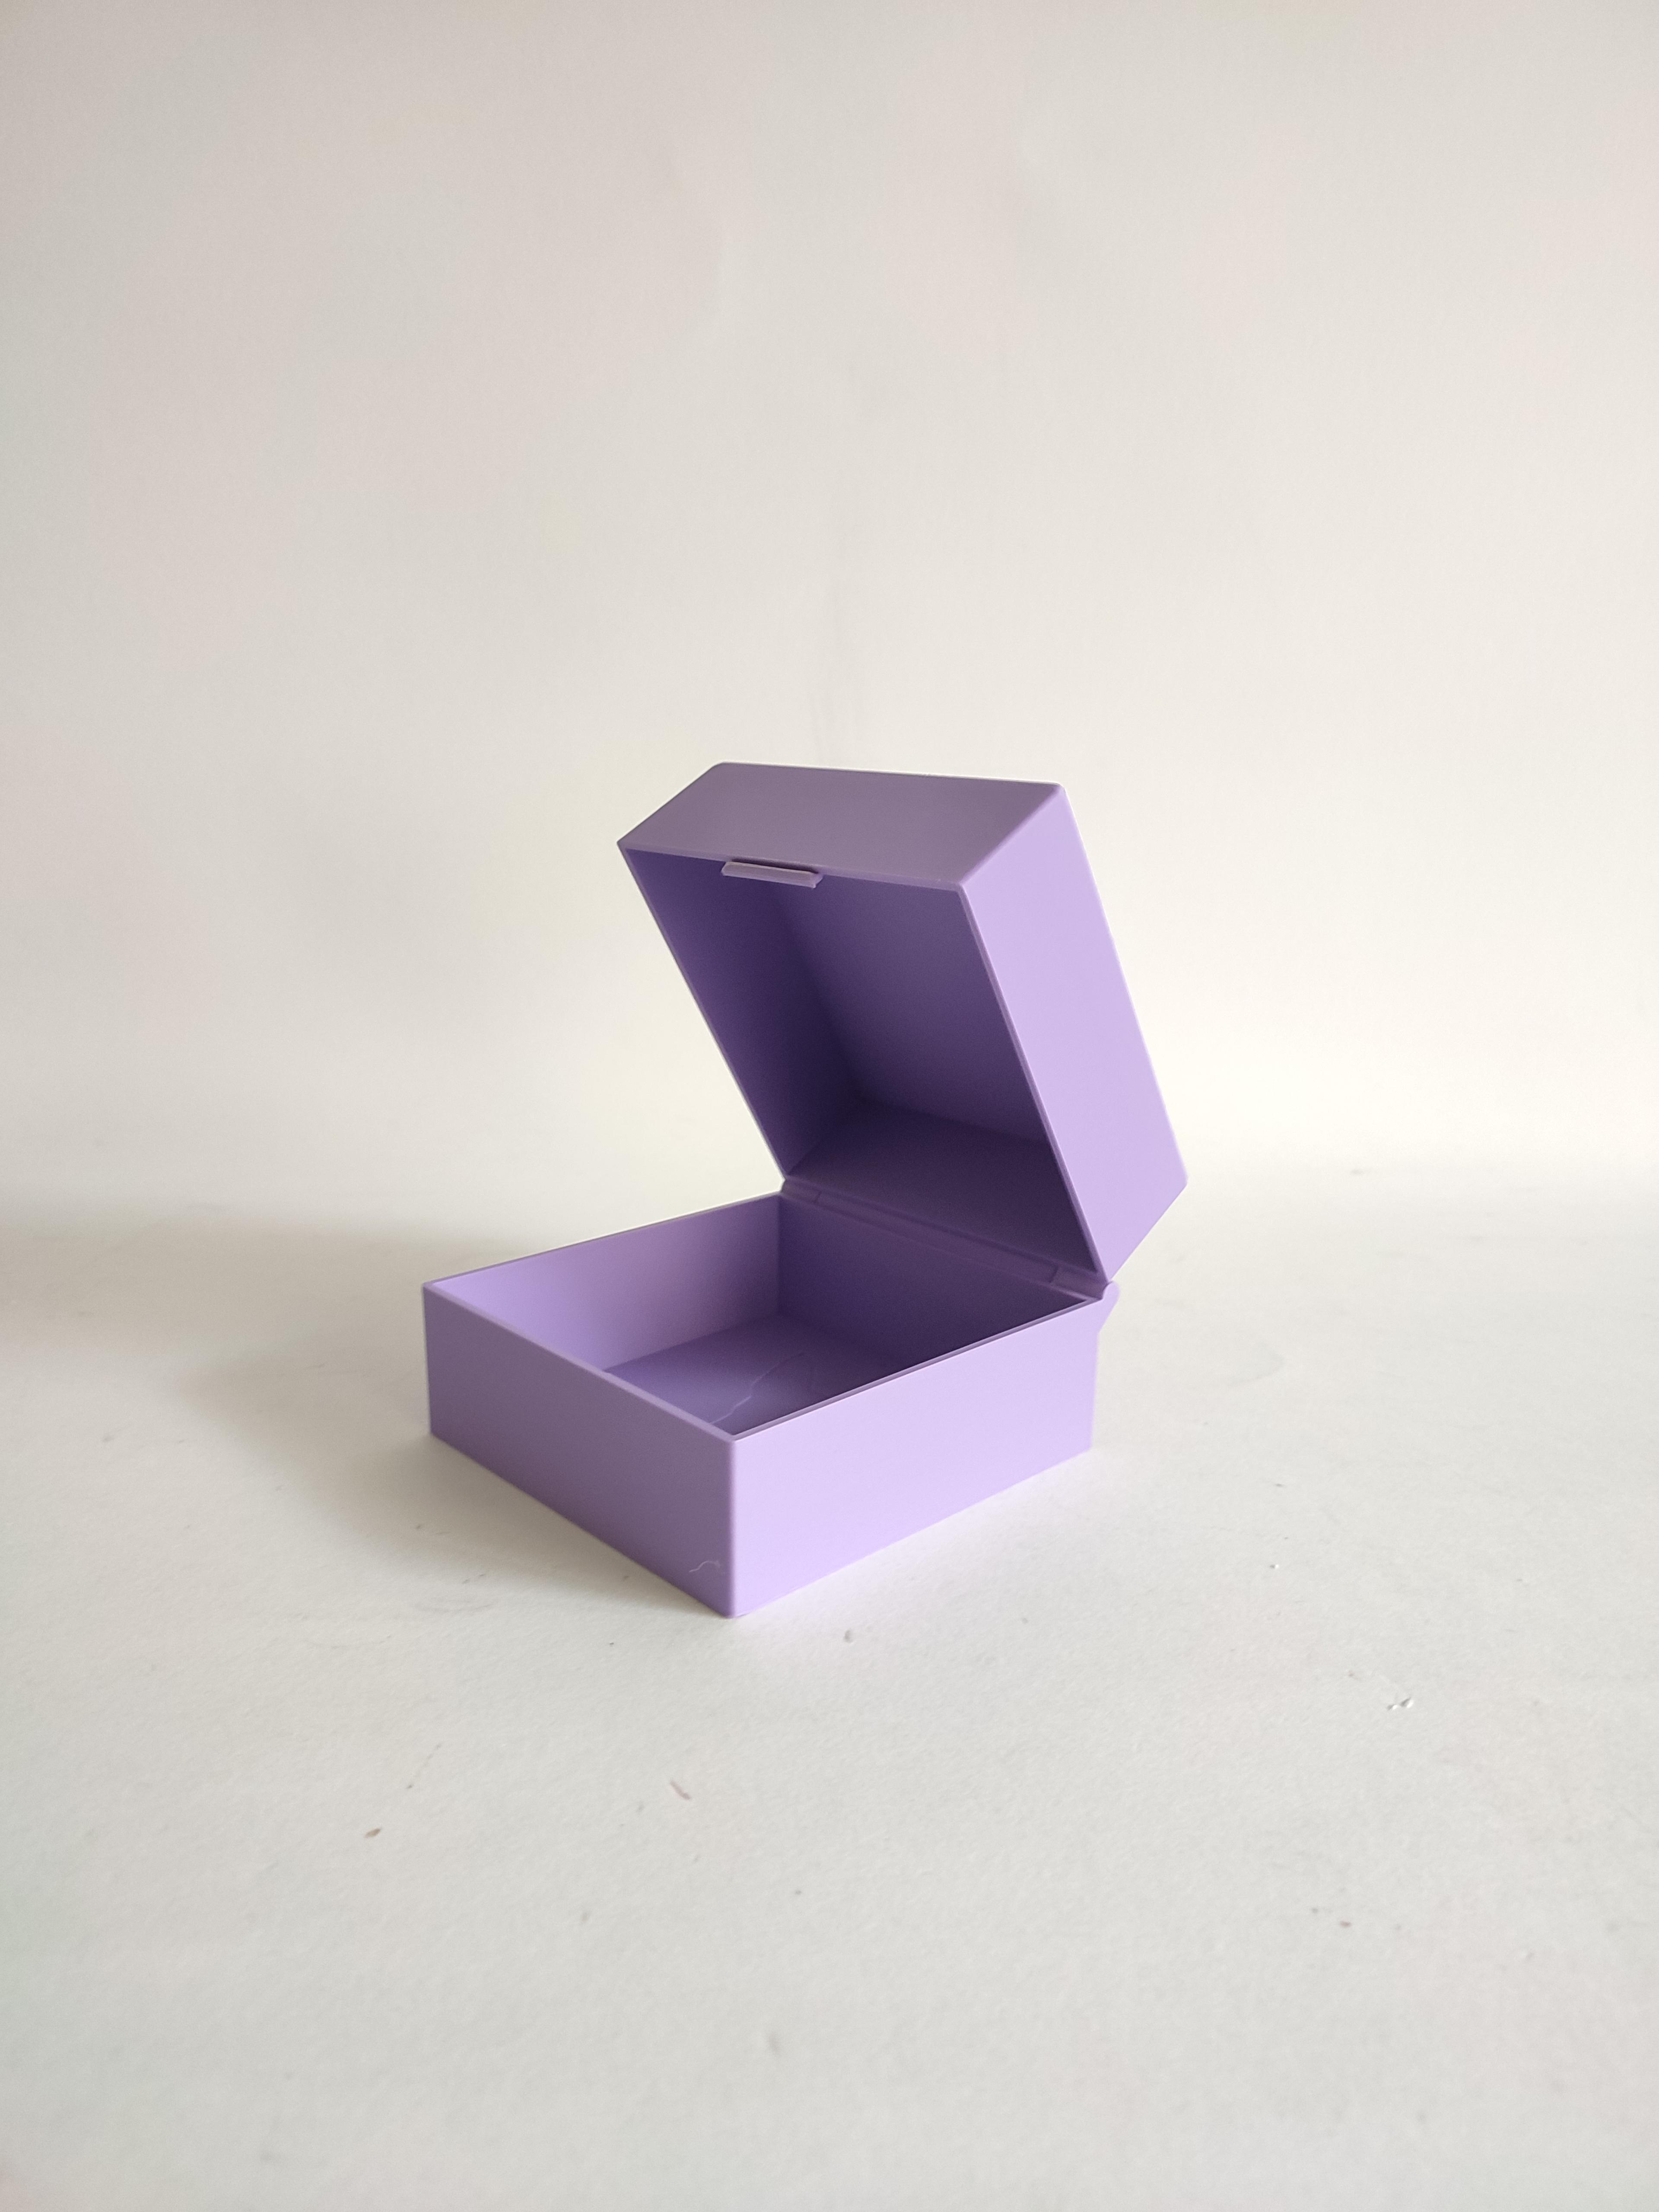 Simple Box Print-In-Place 3d model